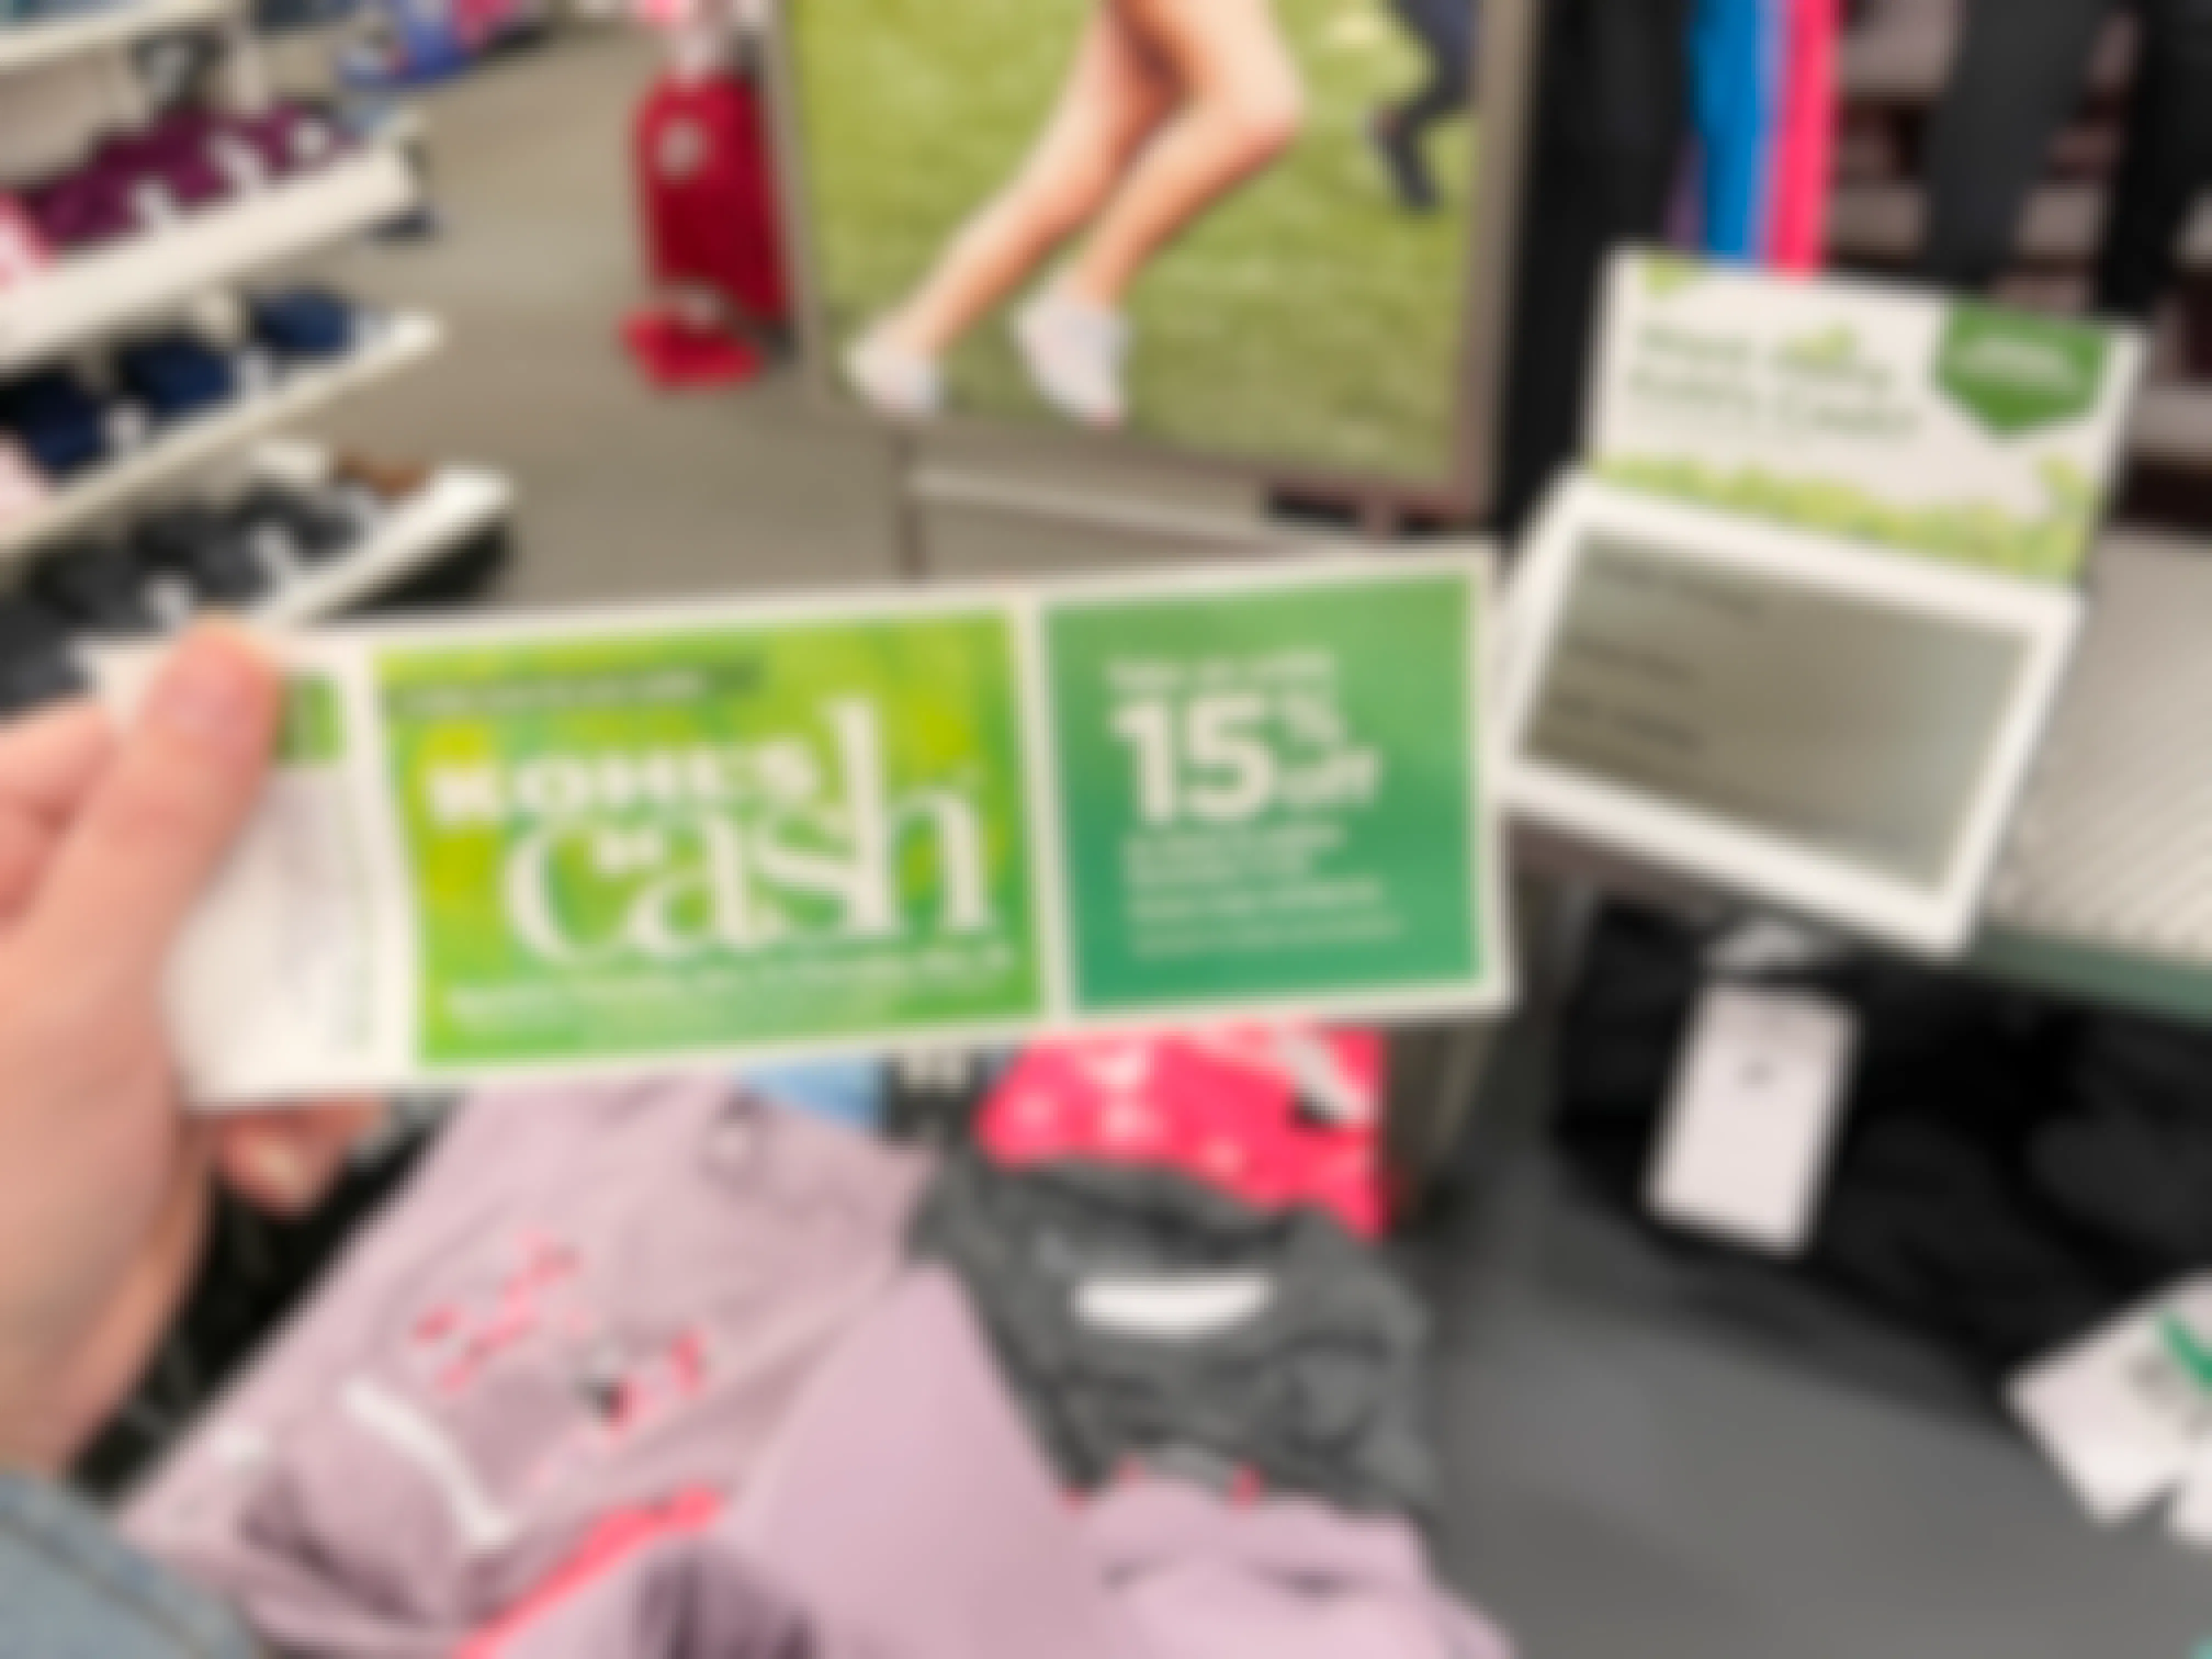 A person holding Kohl's cash near a sales sign